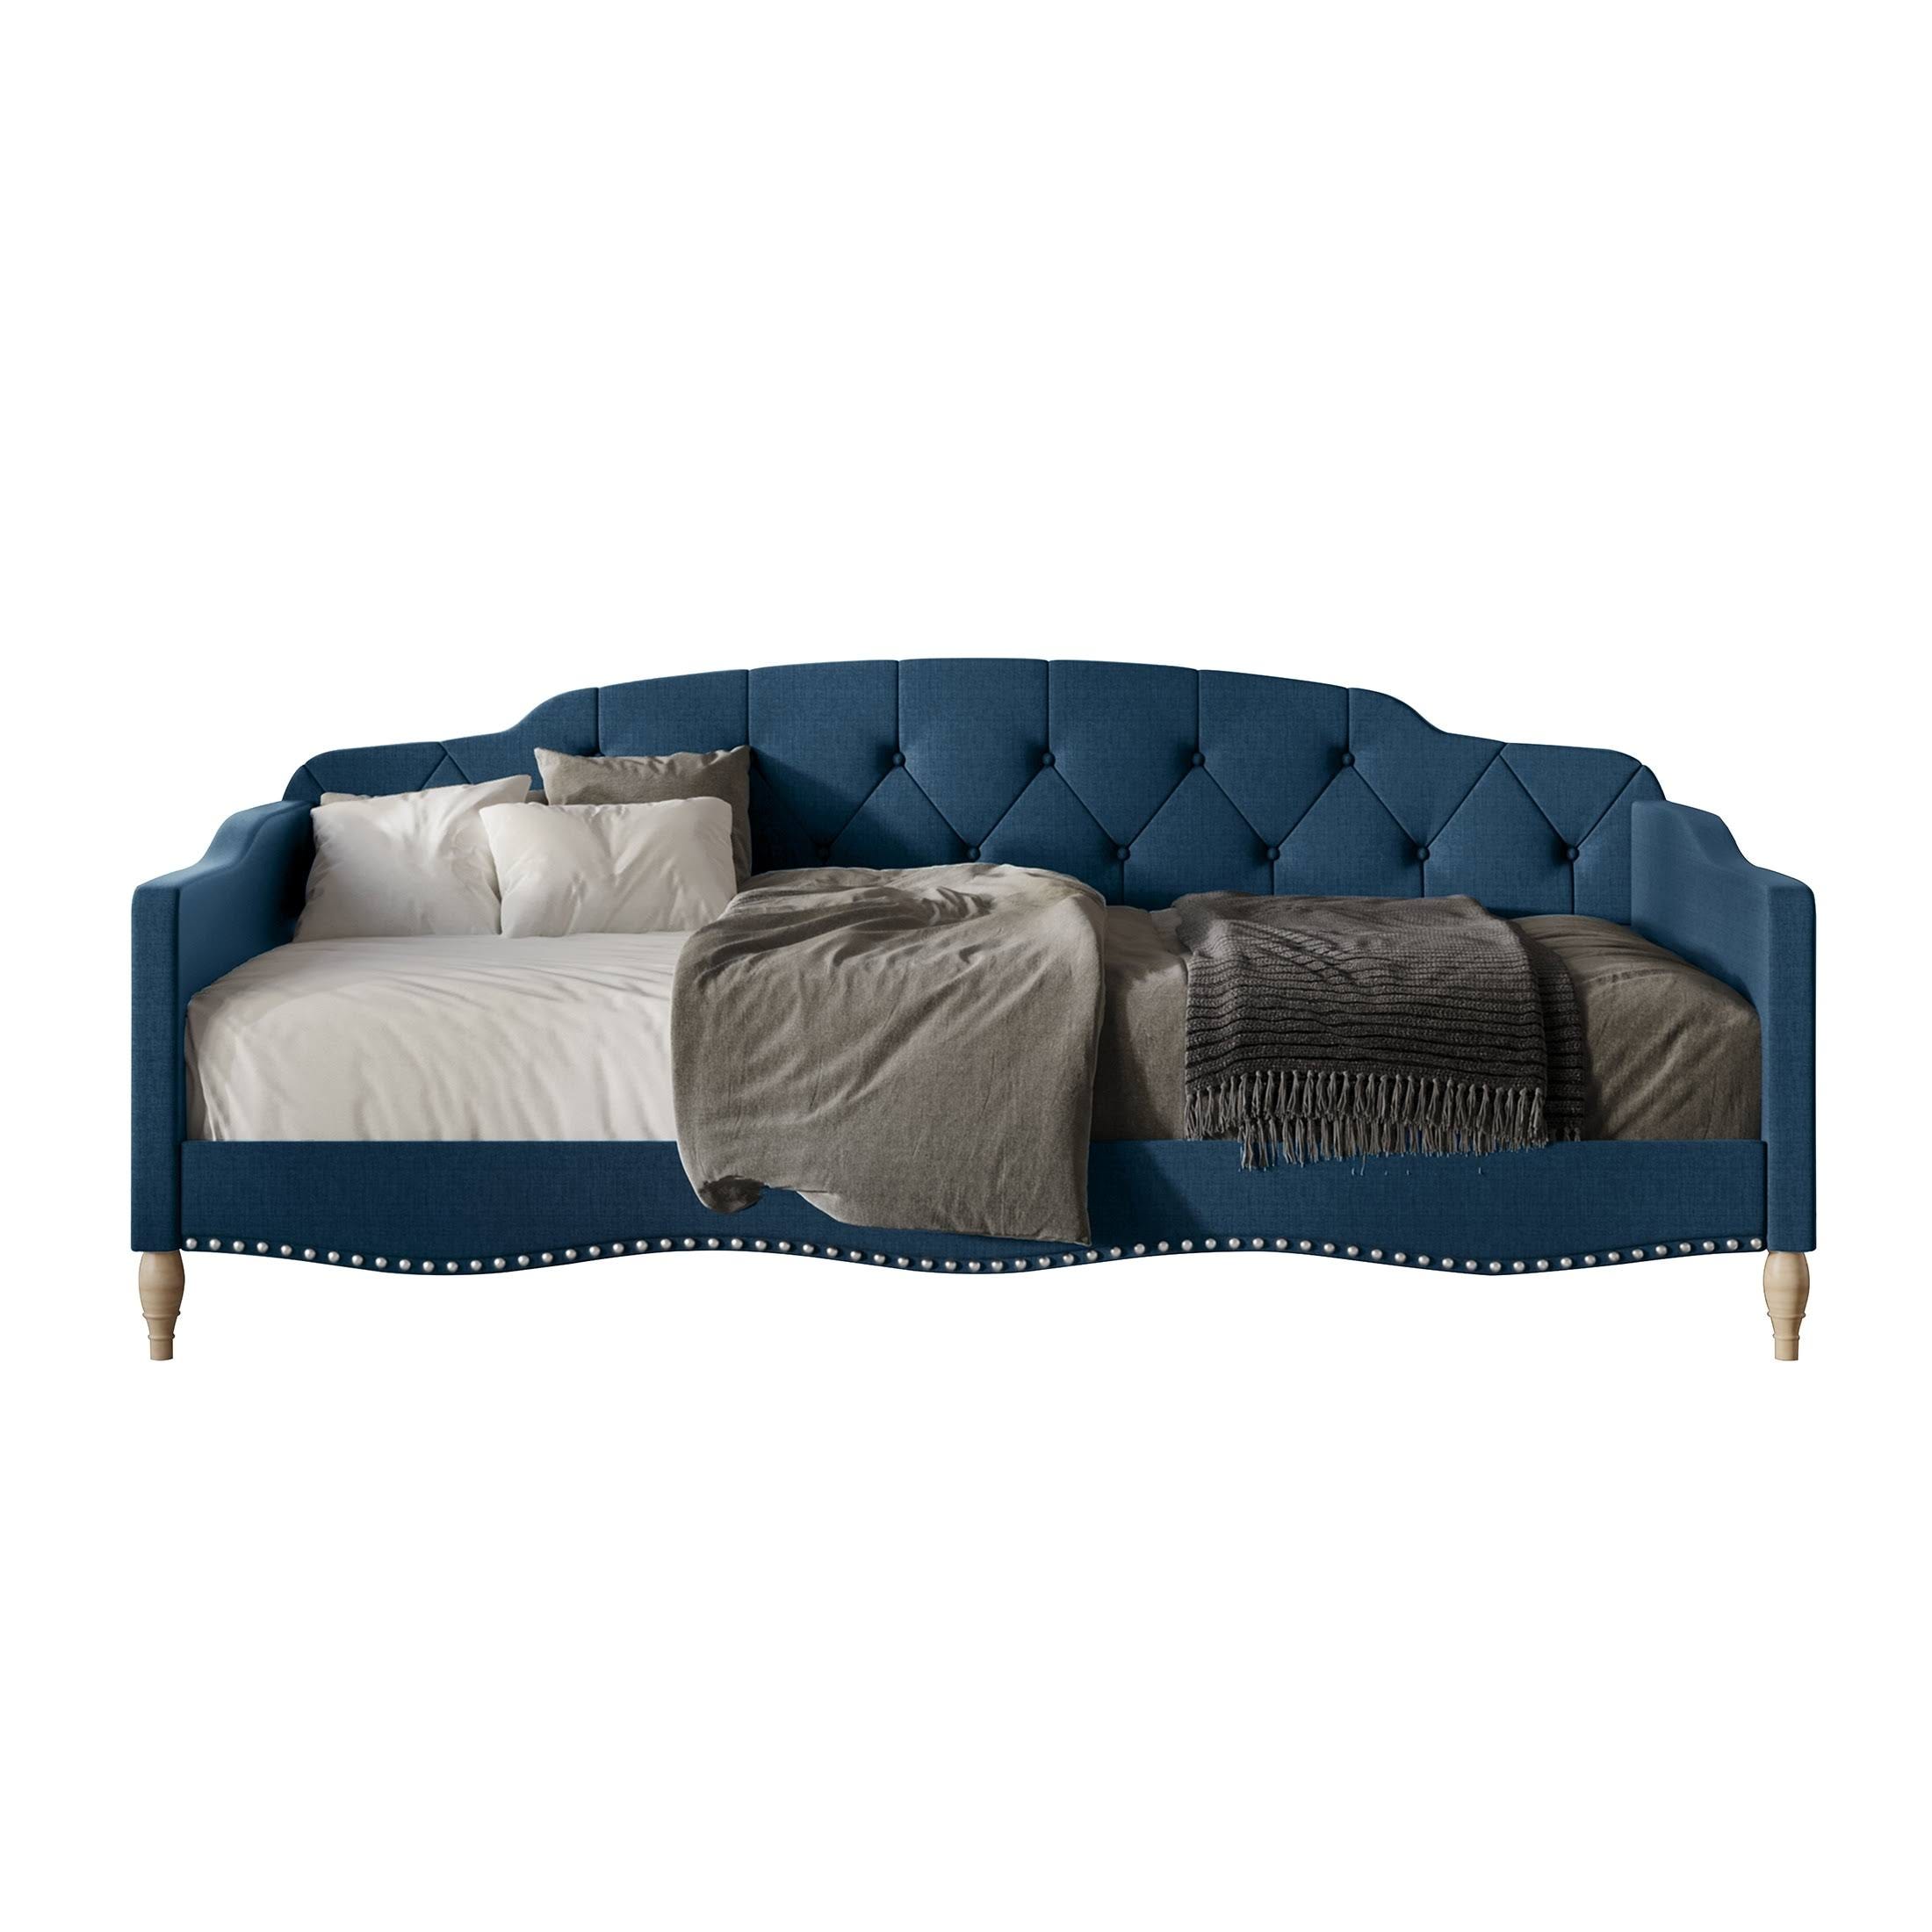 Elegant Linen Upholstered Twin Daybed with Tufted Button Detailing | Image